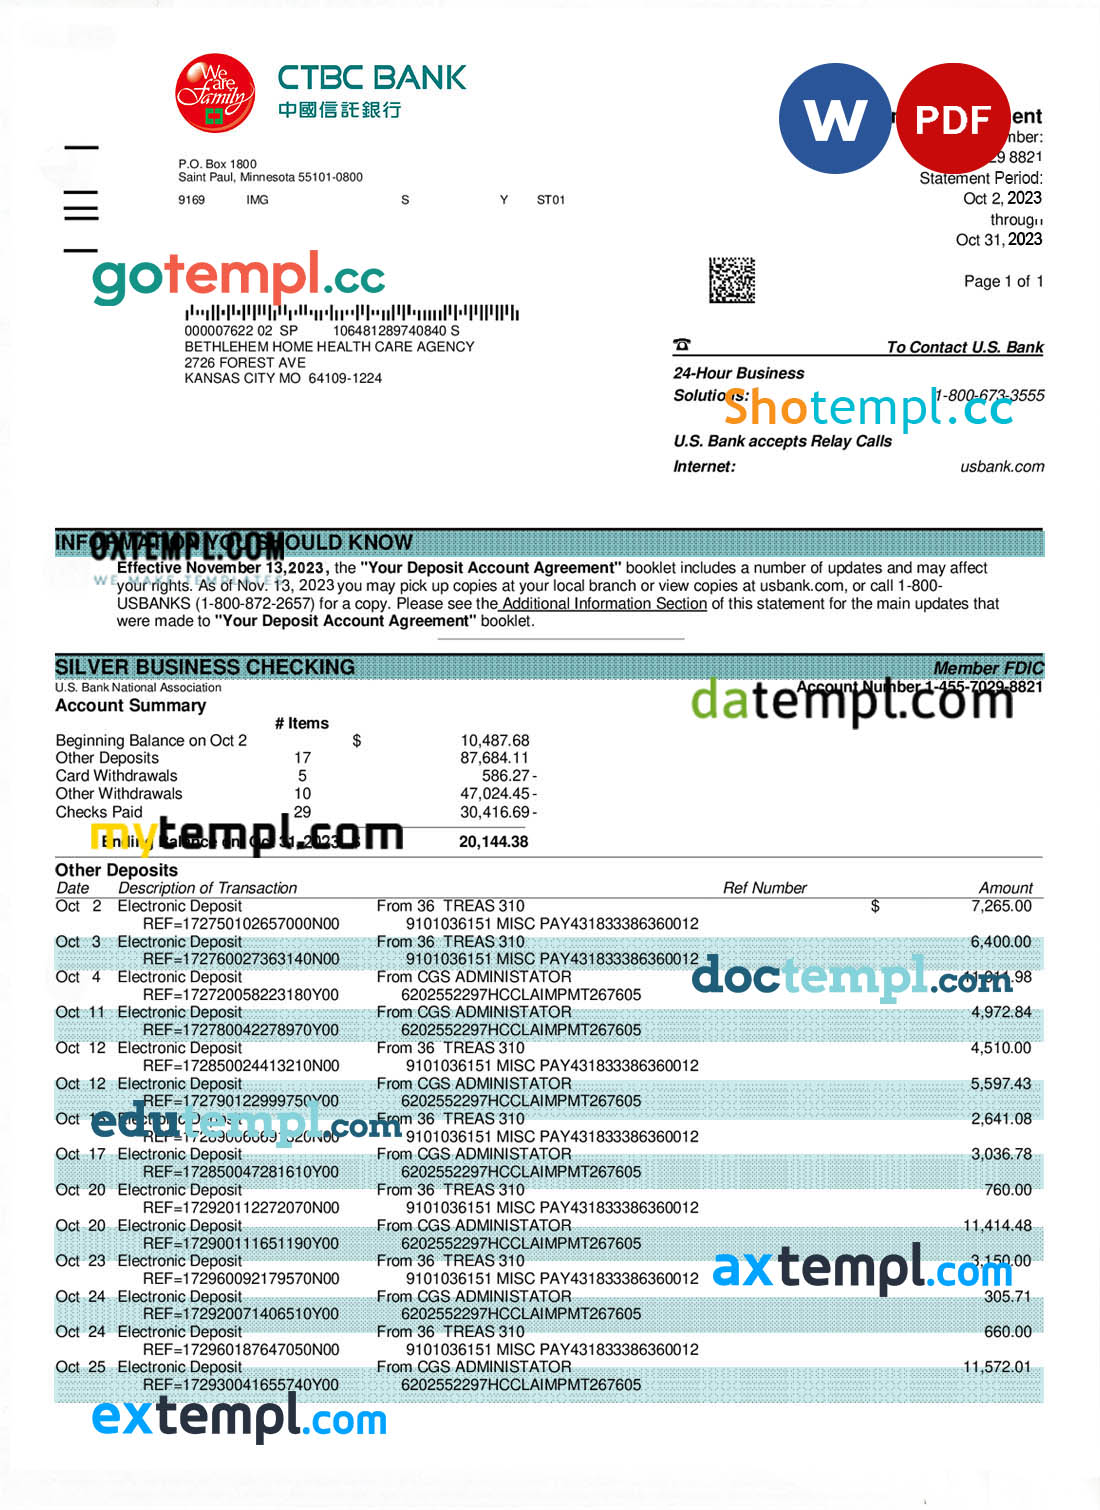 CTBC Bank company statement Word and PDF template